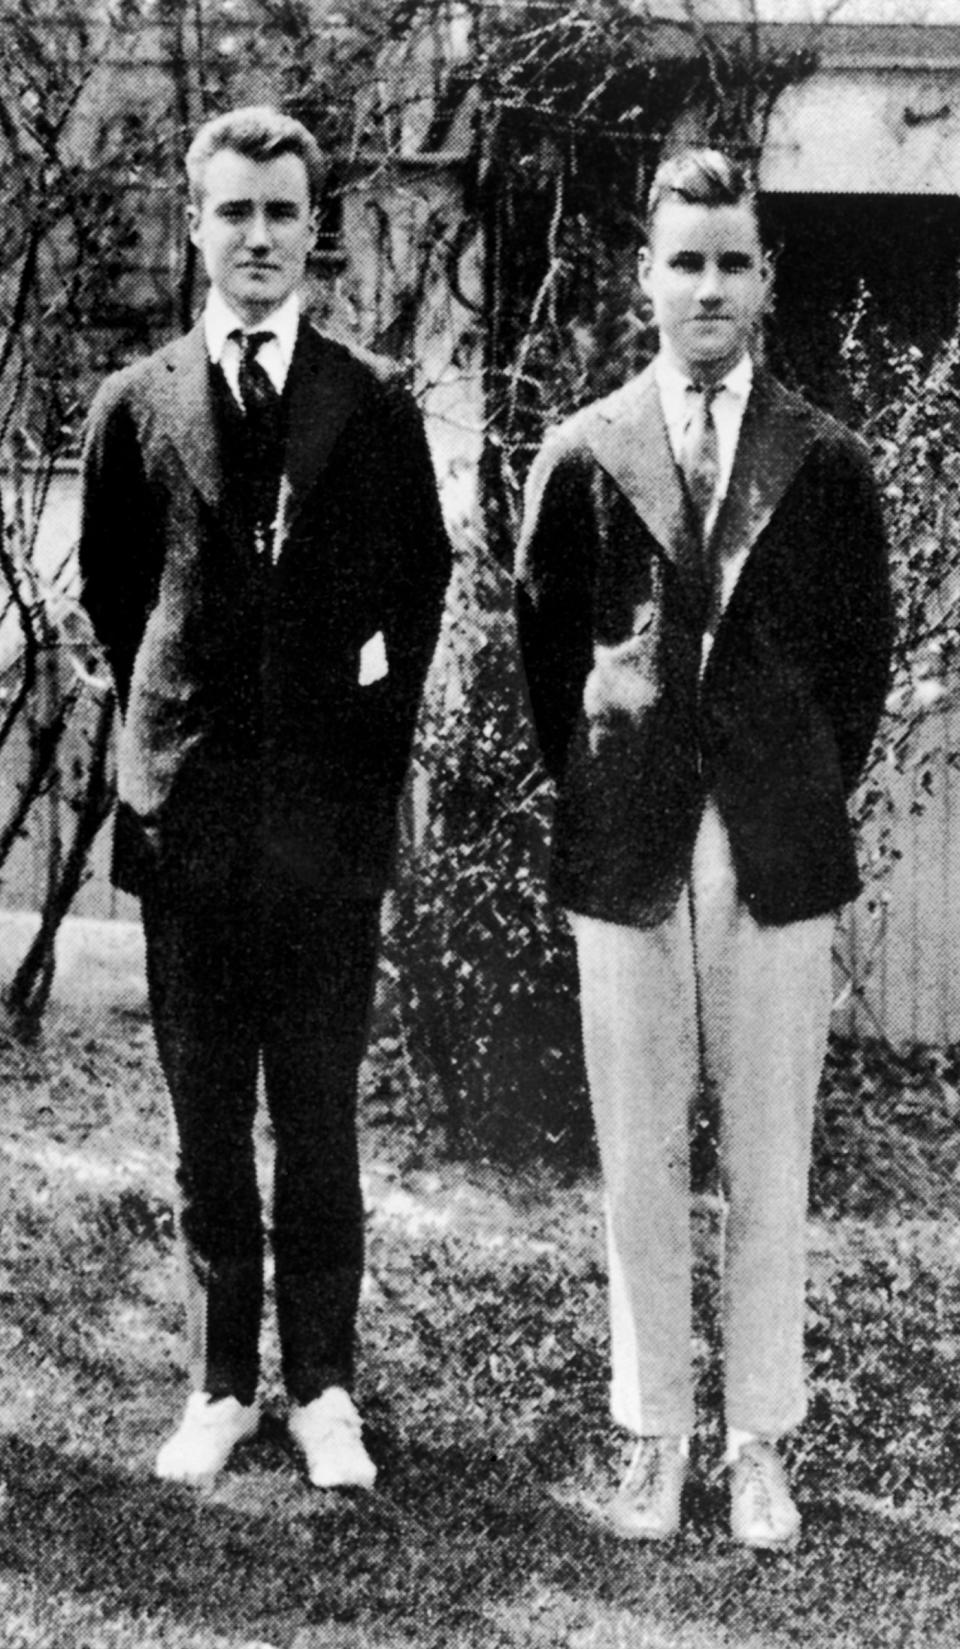 The future co-founders of TIME, Henry Luce (left) and Briton Hadden (right), at Hotchkiss Prepatory School in Lakeville, Conn., in 1916.<span class="copyright">The LIFE Picture Collection/Shutterstock</span>